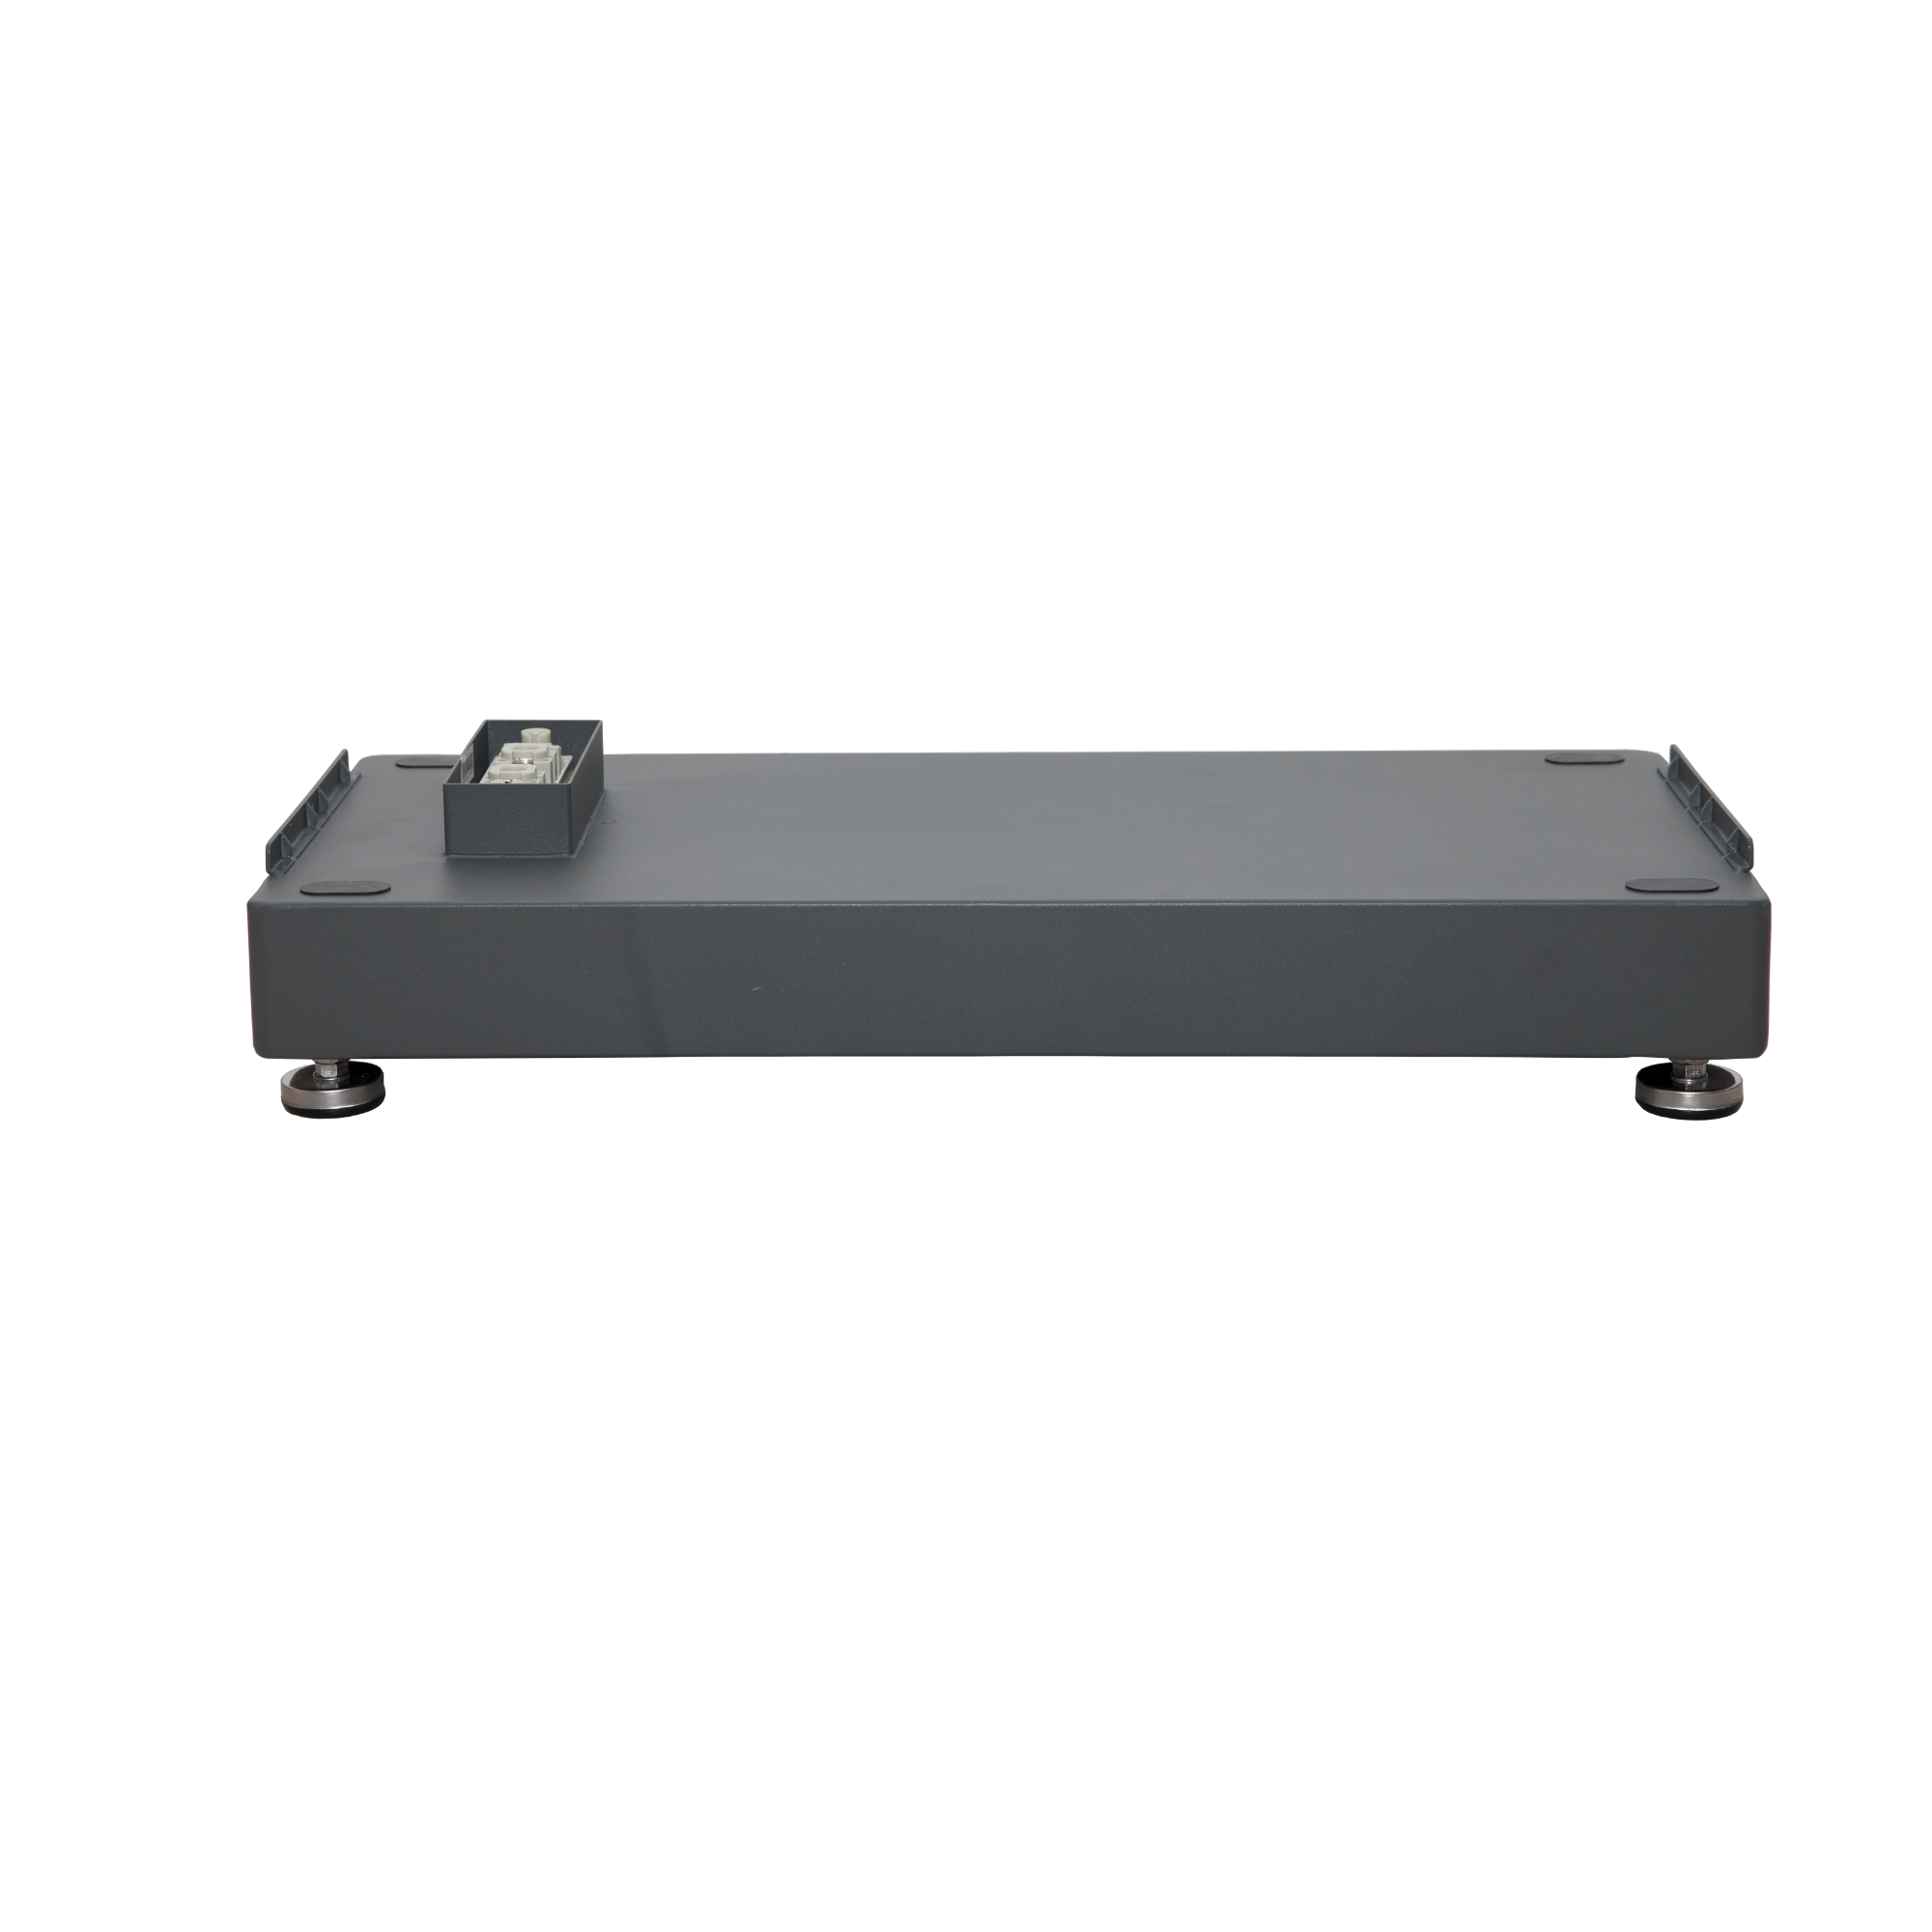  BYD Battery-Box Premium LVS Base+Cover